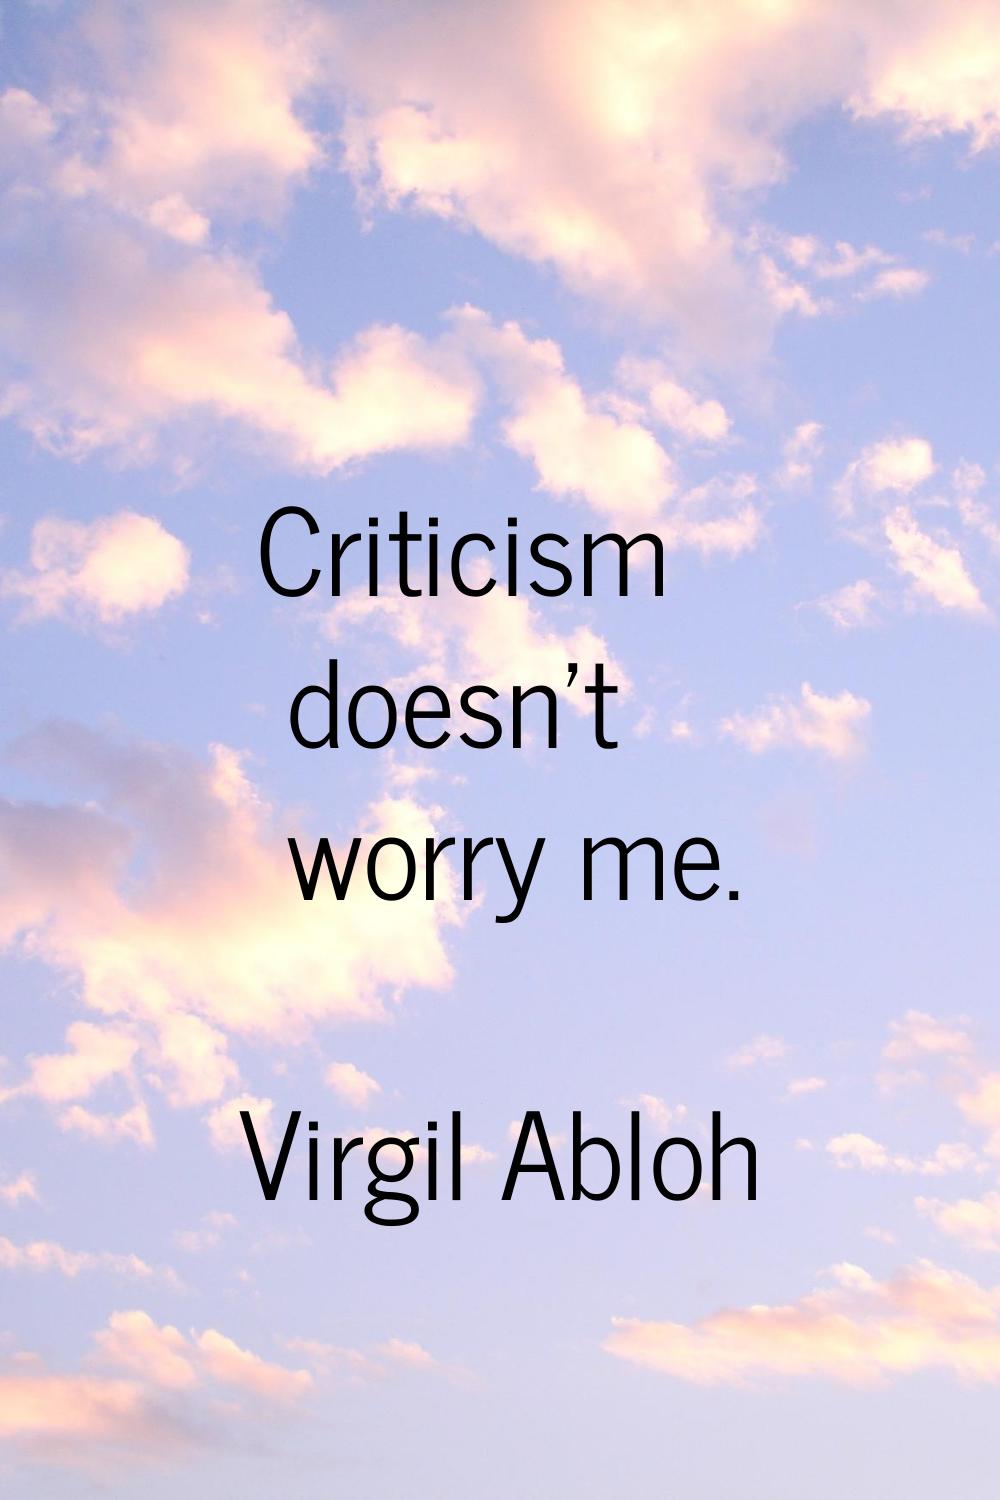 Criticism doesn't worry me.